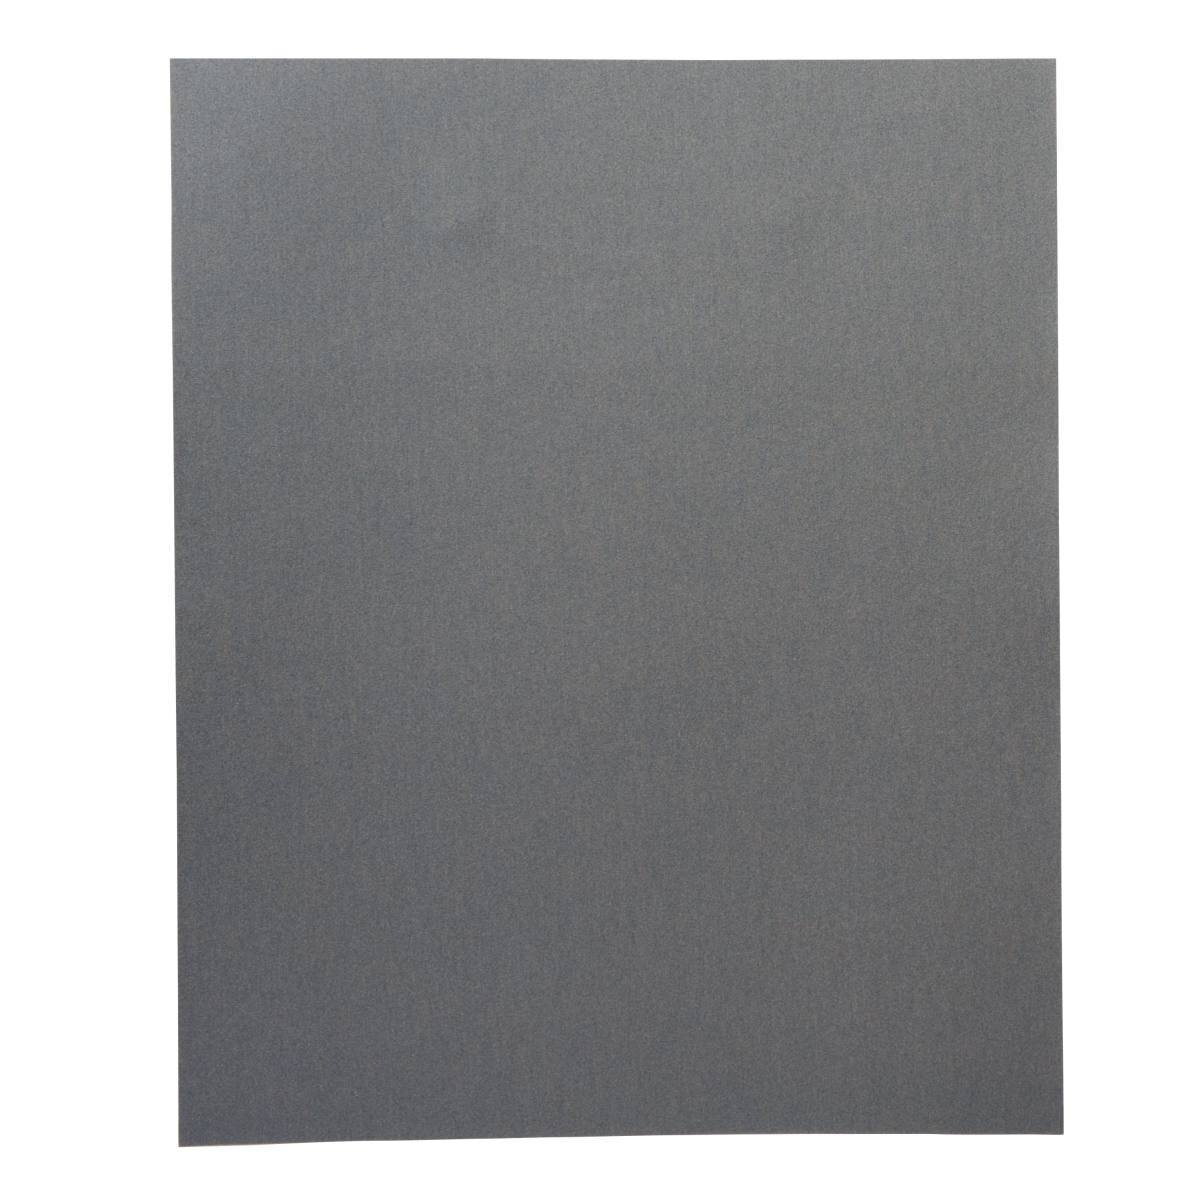 3M Wetordry 734 disc paper, 230 mm x 280 mm, P320 "Packed per 25 pieces